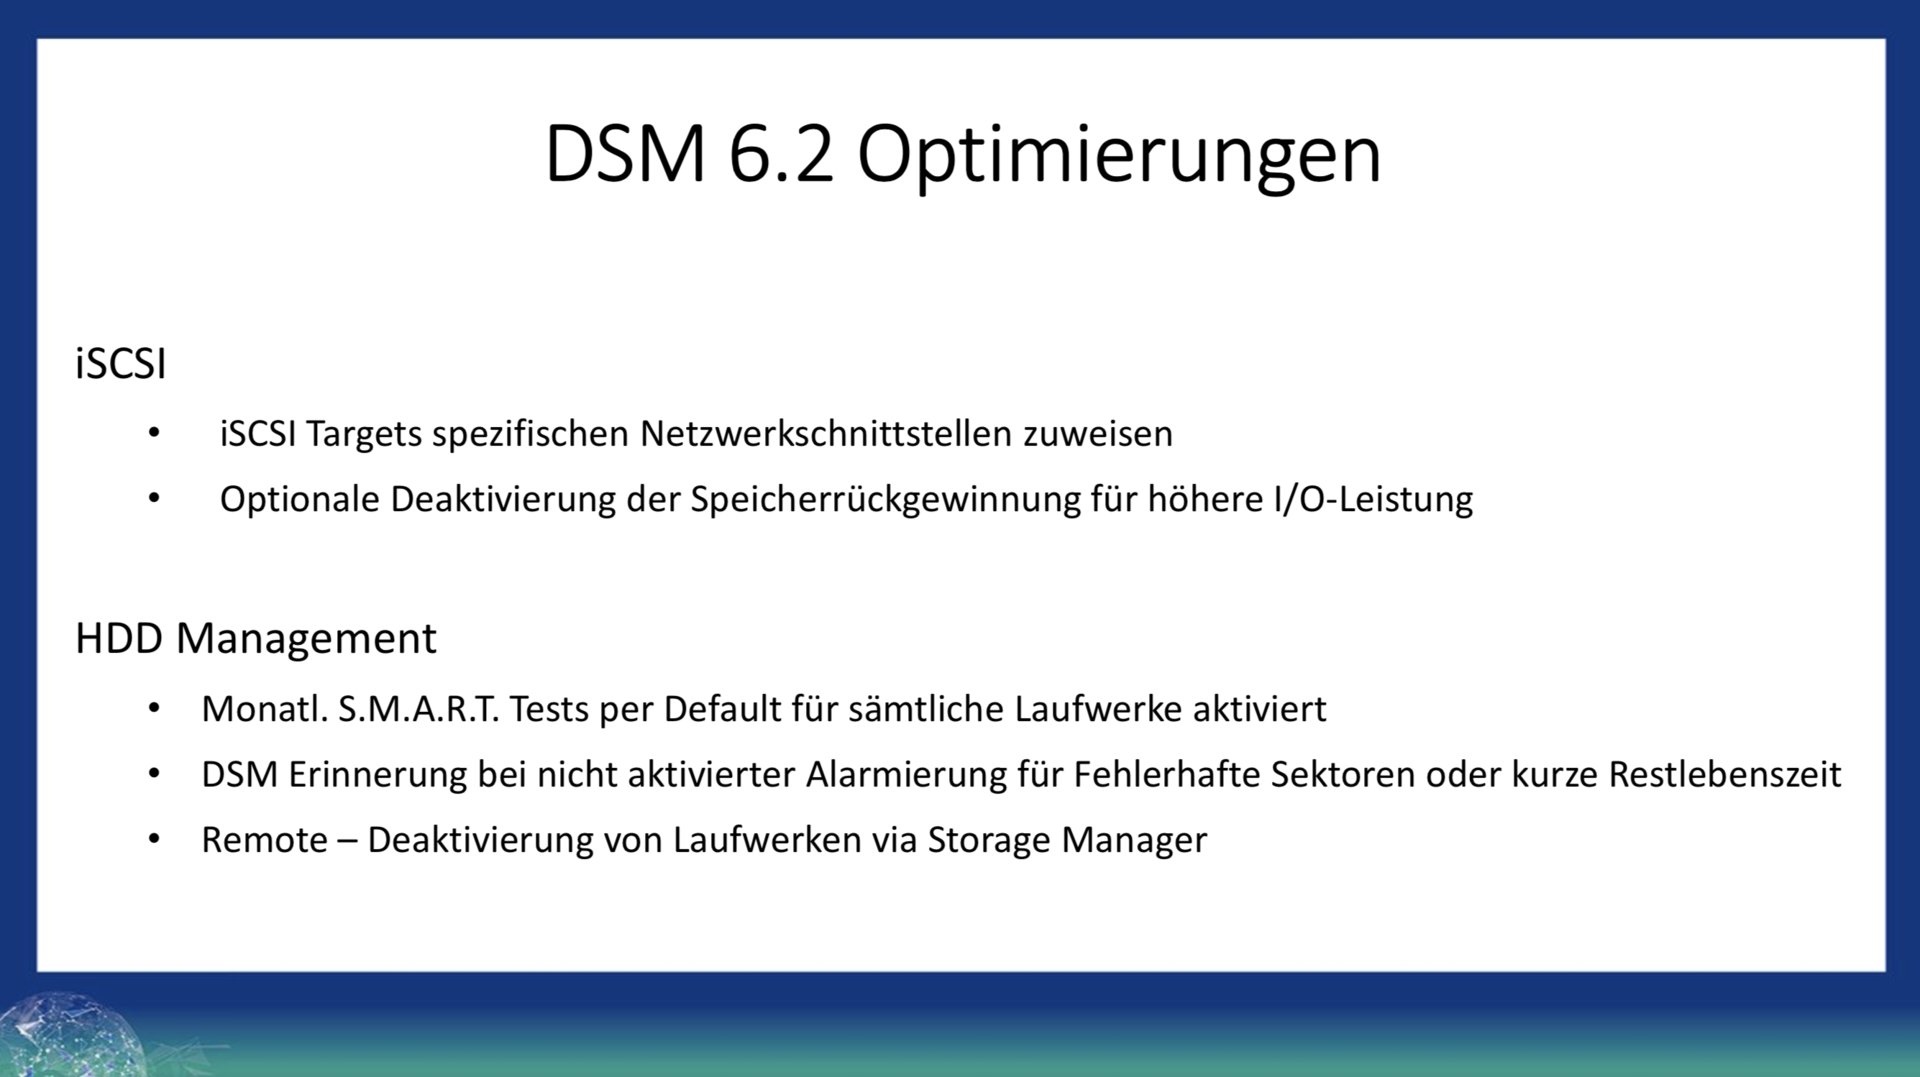 Synology DSM 6.2 Preview